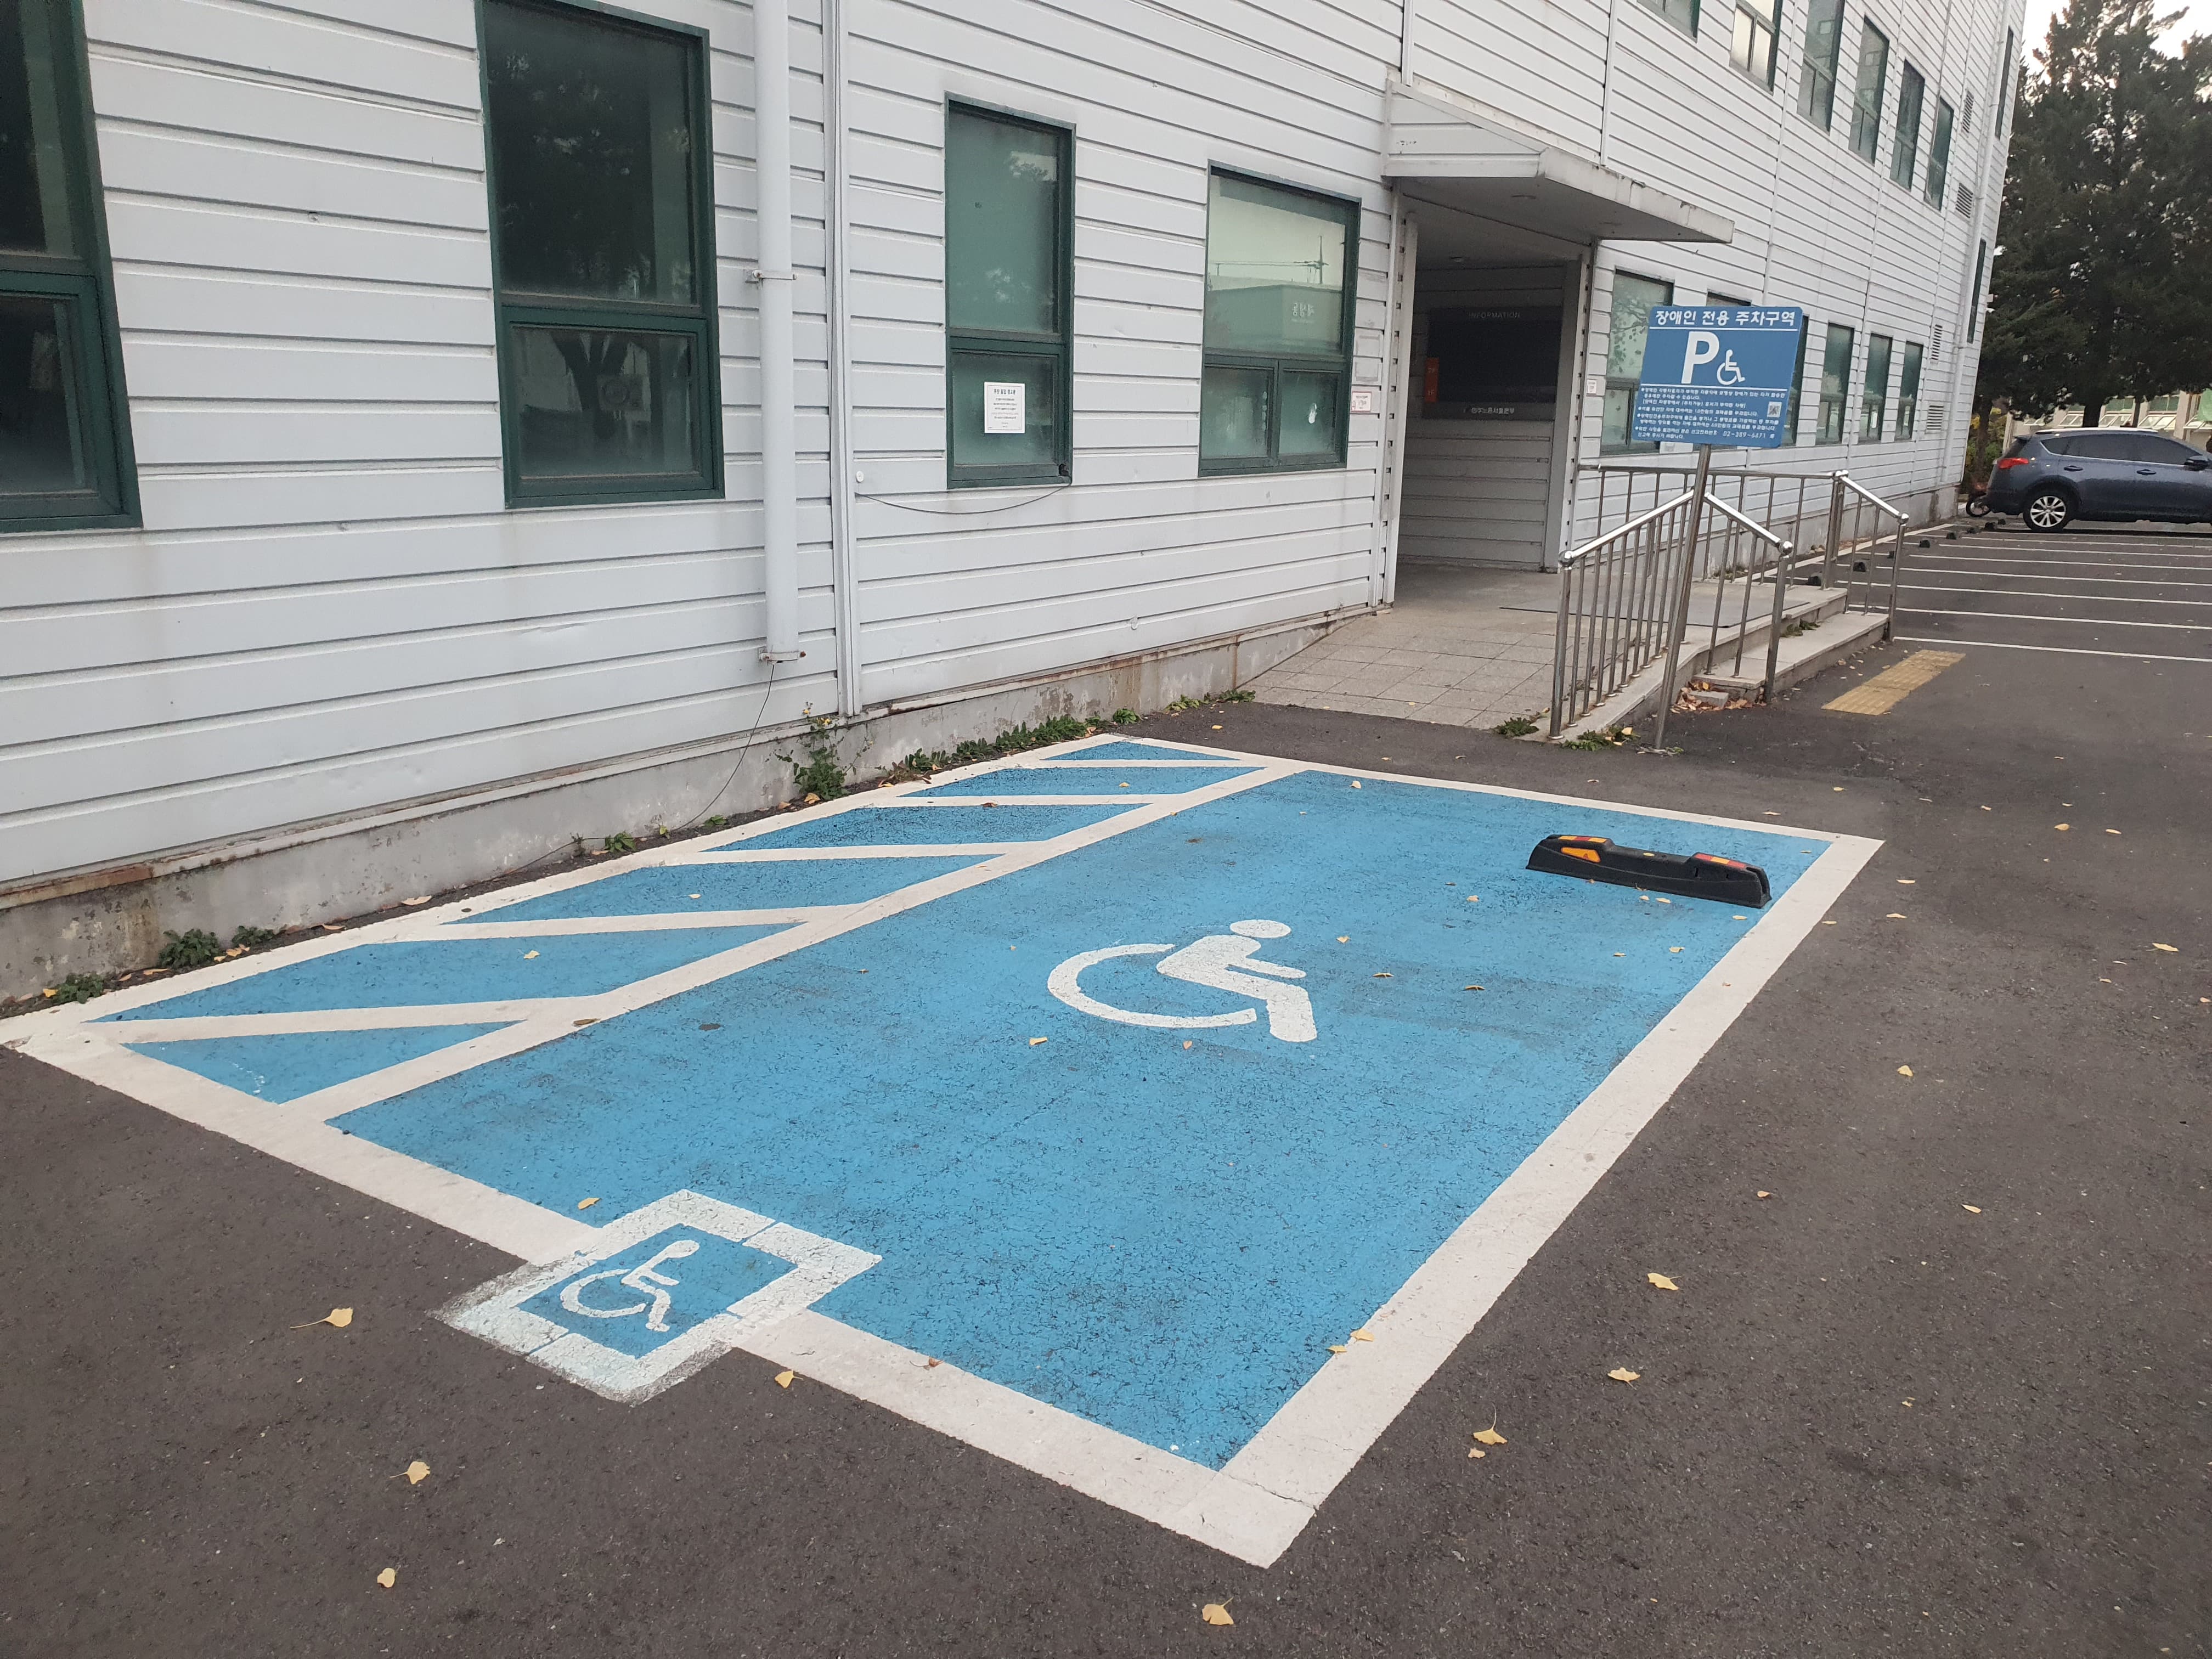 Parking facilities0 : 1-sided outdoor parking facilities for persons with disabilities neat the Collabo Bay